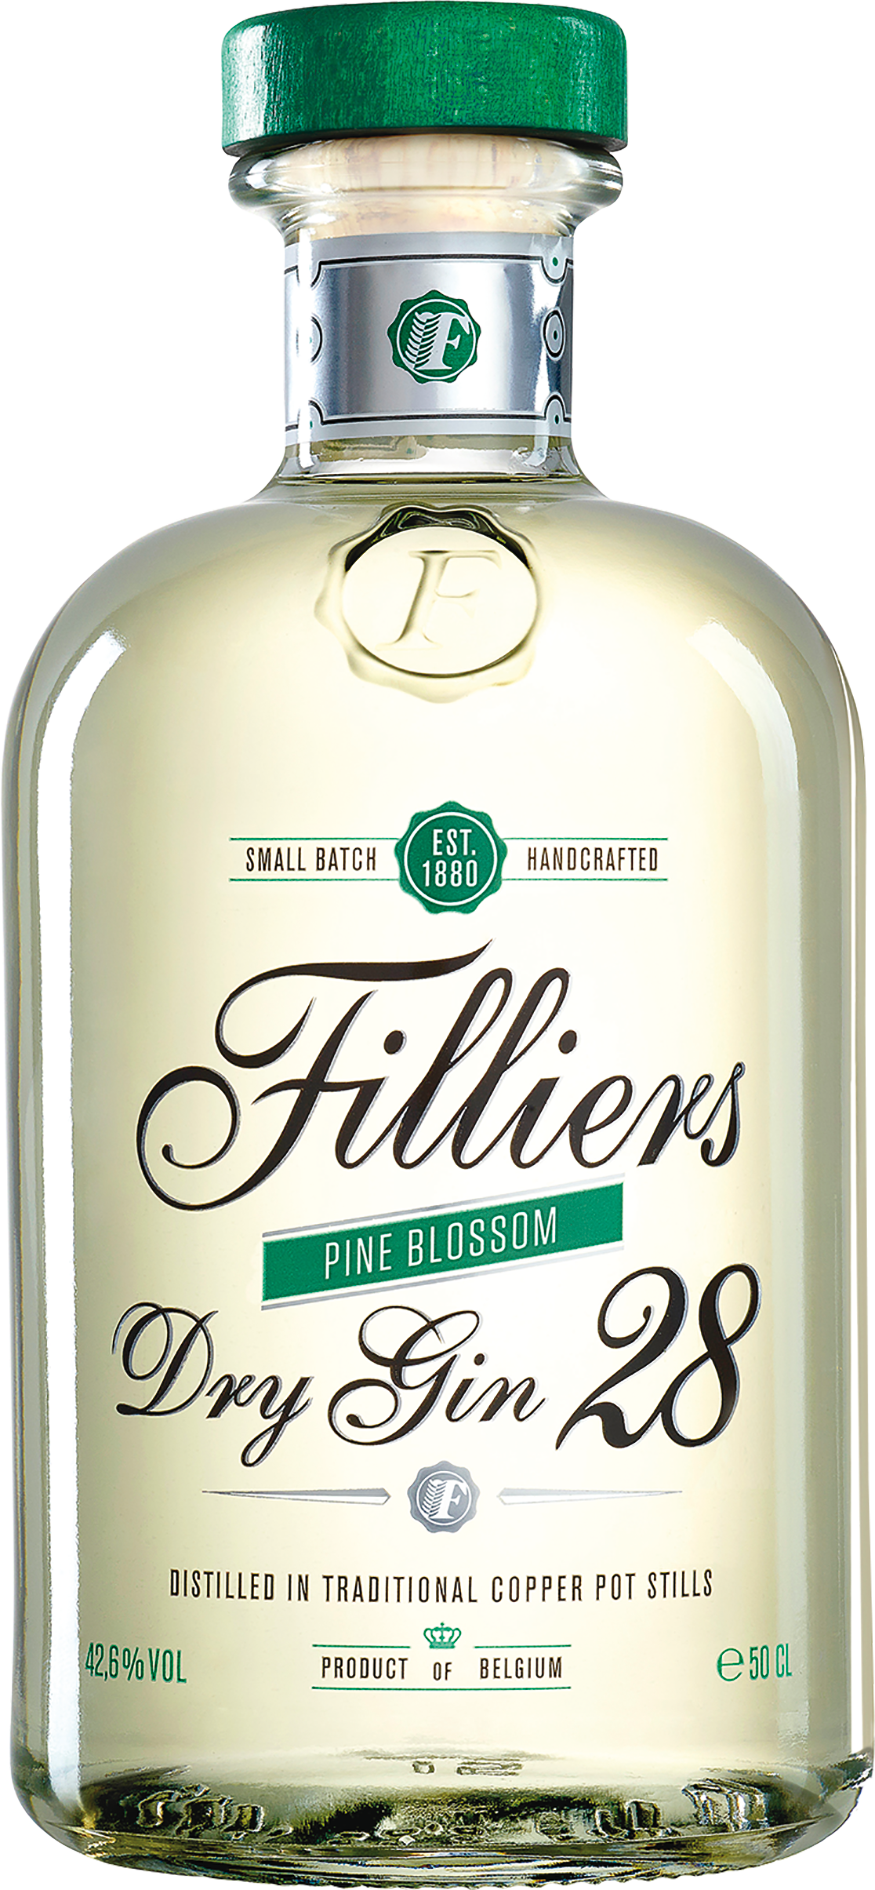 Flasche Filliers Gin 28 Pine Blossom